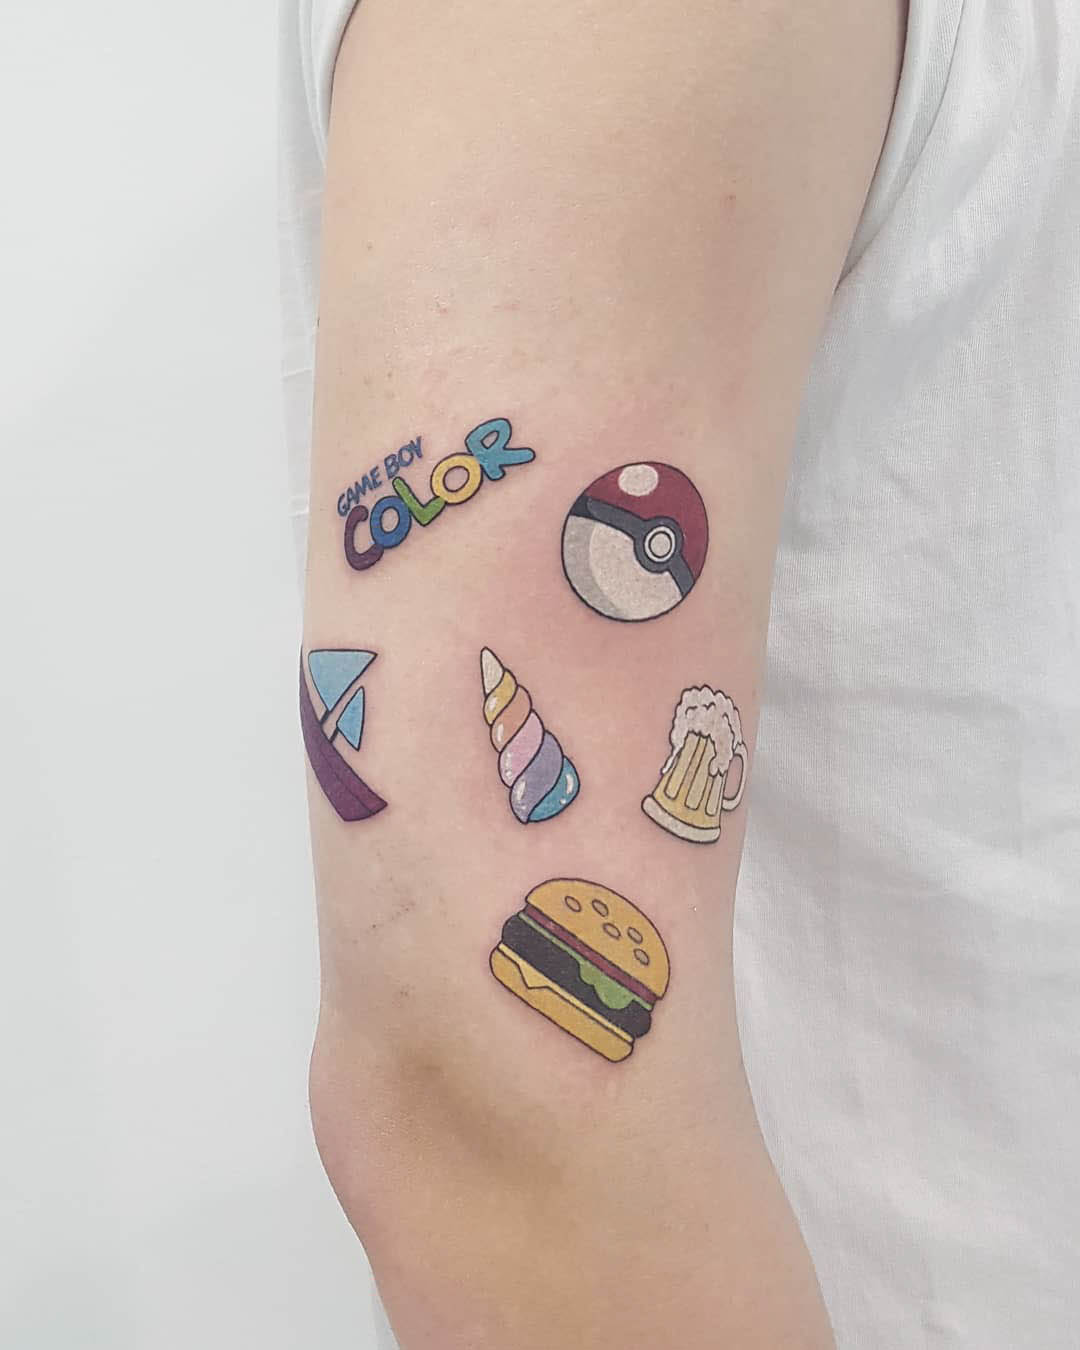 small tattoos on arm gameboy